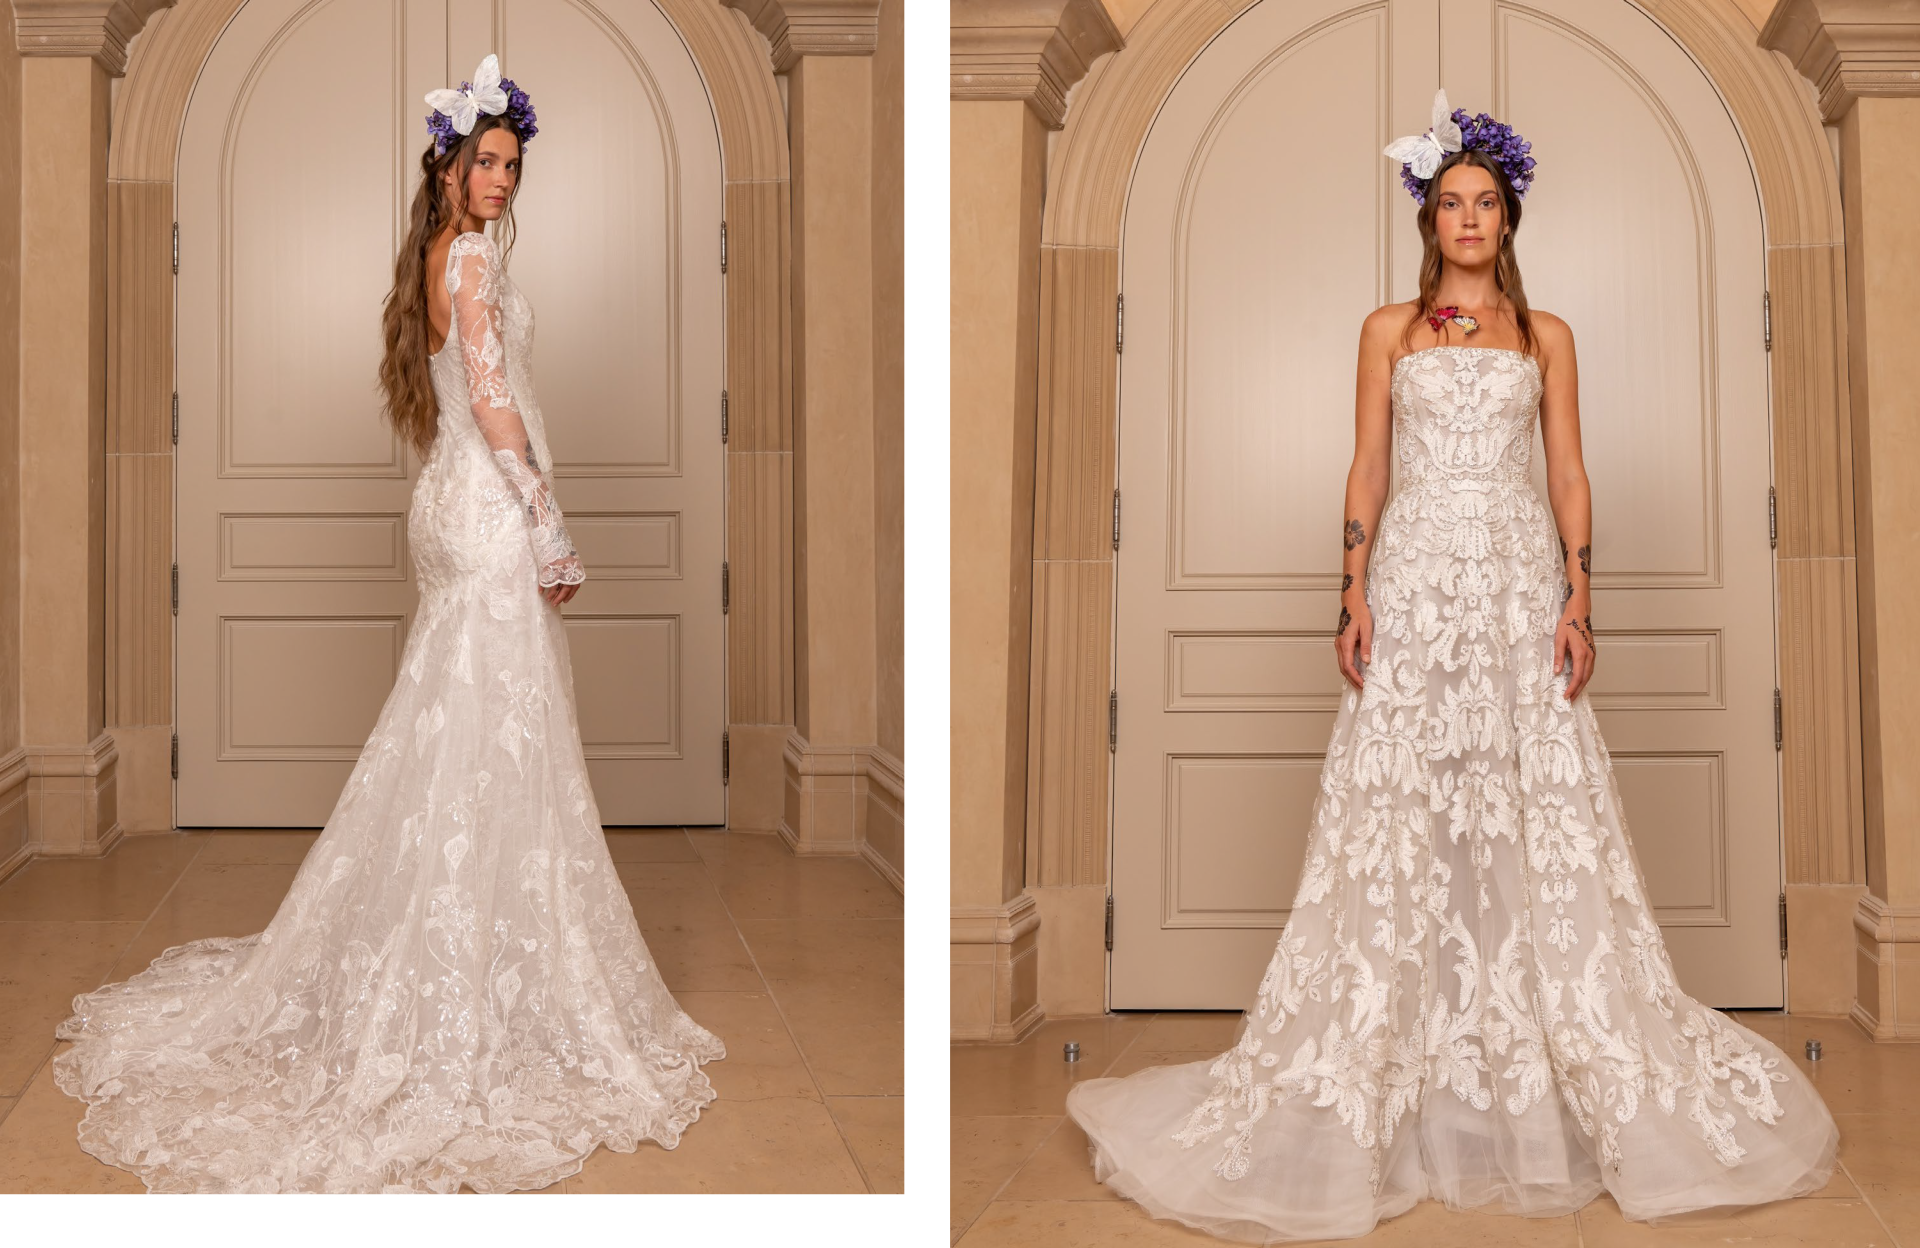 Reem Acra “Love and Dream” Bridal Collection